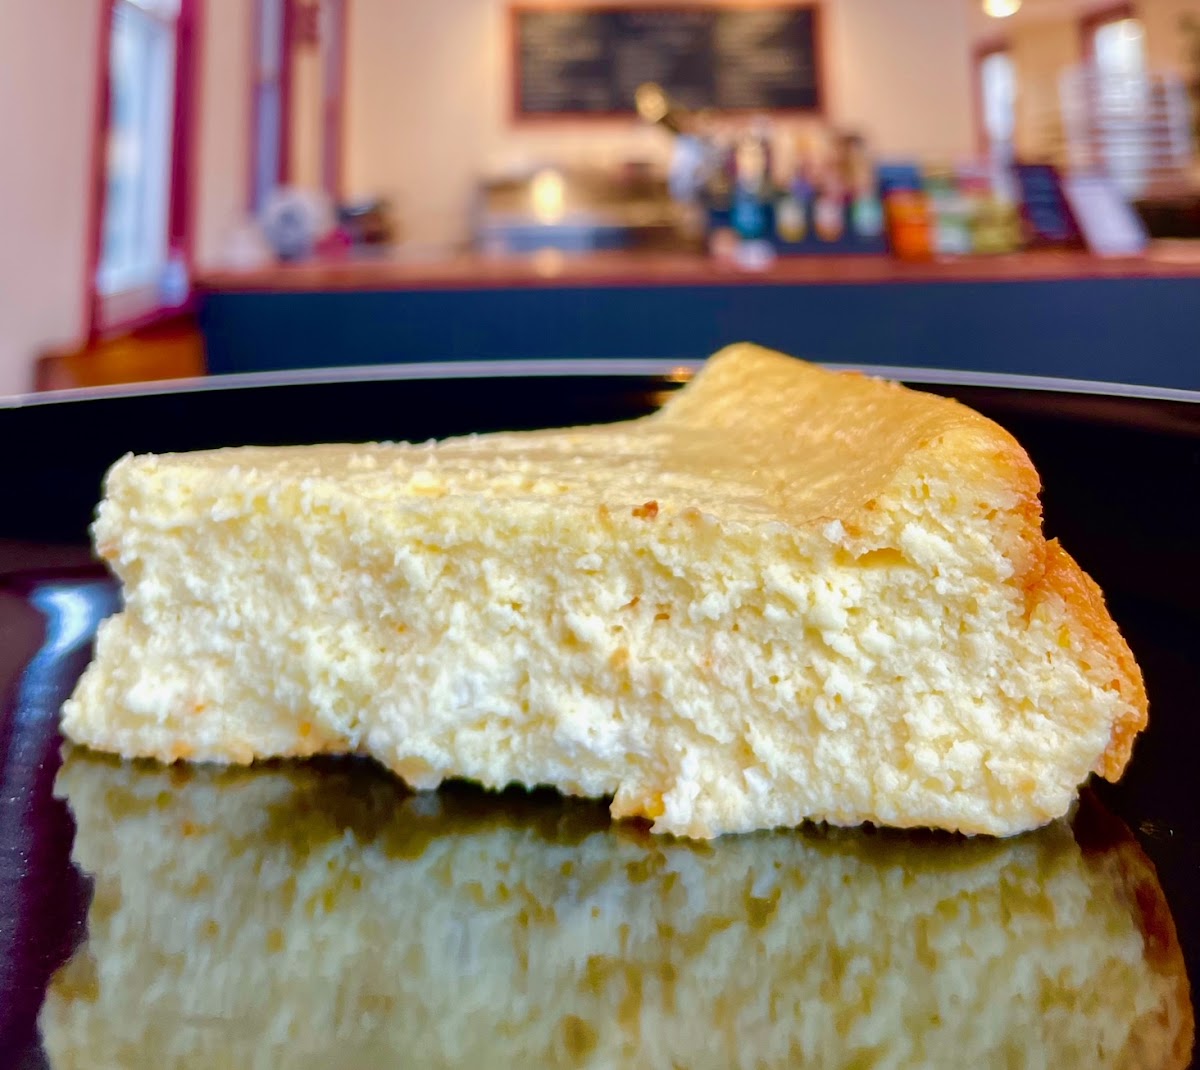 Our Italian Ricotta Cheesecake has no crust and is Gluten Friendly